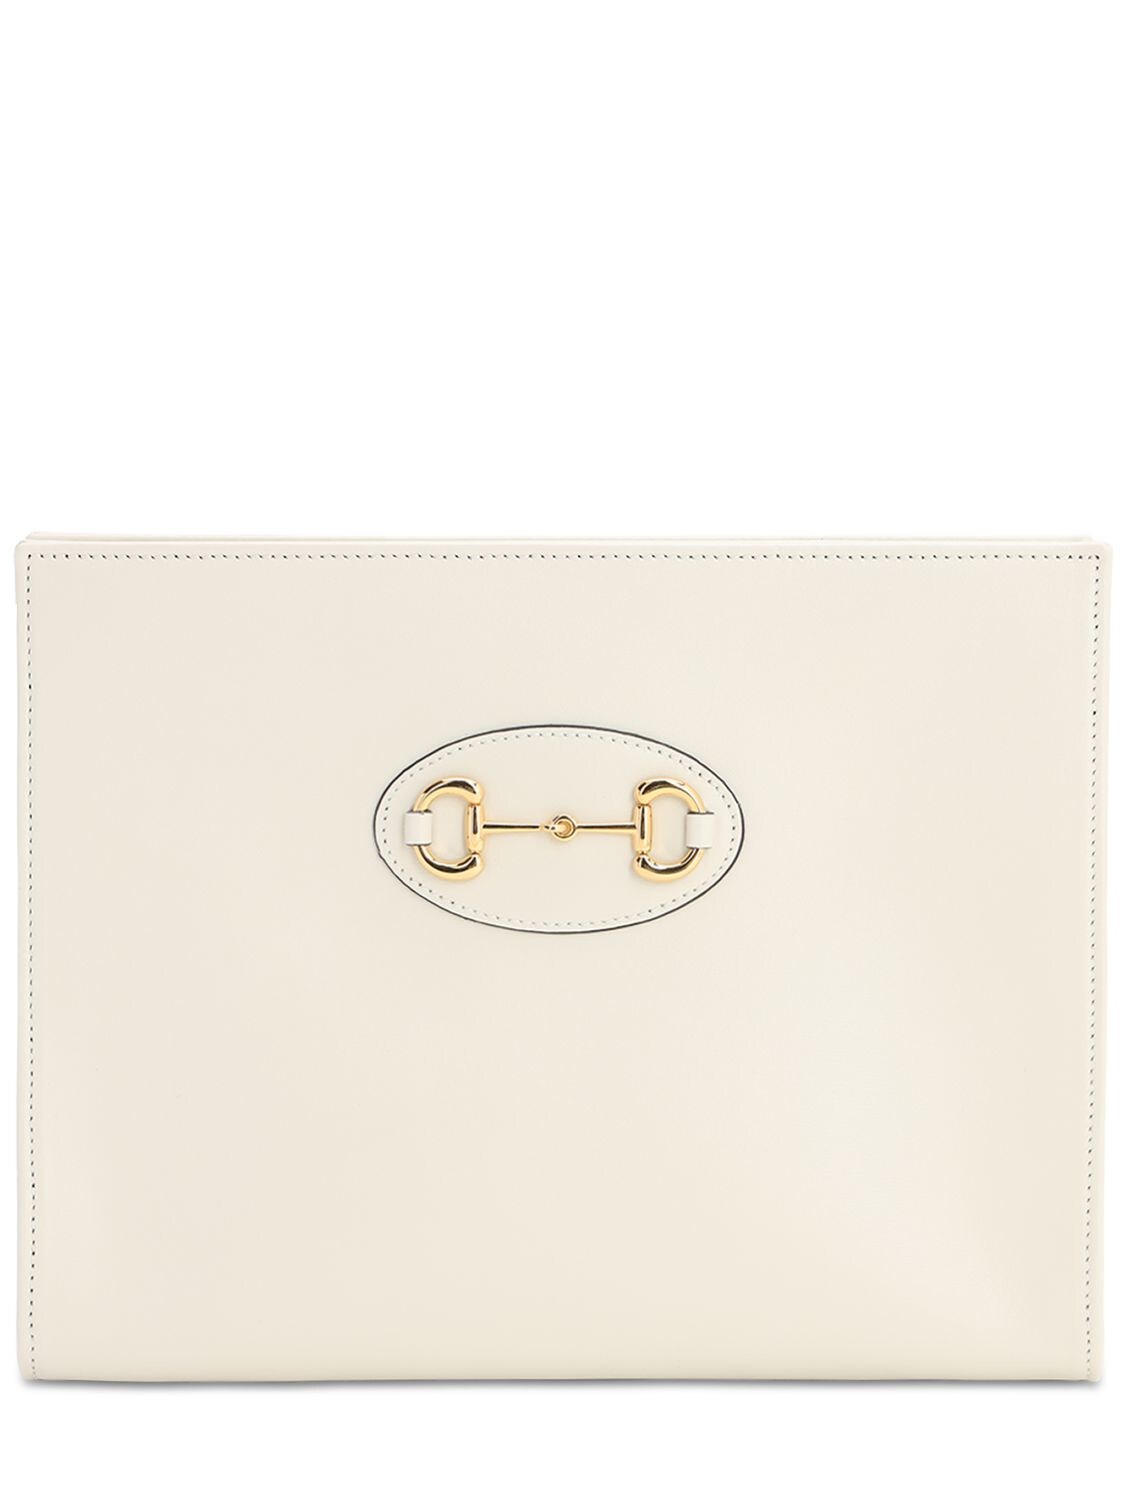 Gucci 1955 Horsebit Leather Pouch In Mystic White